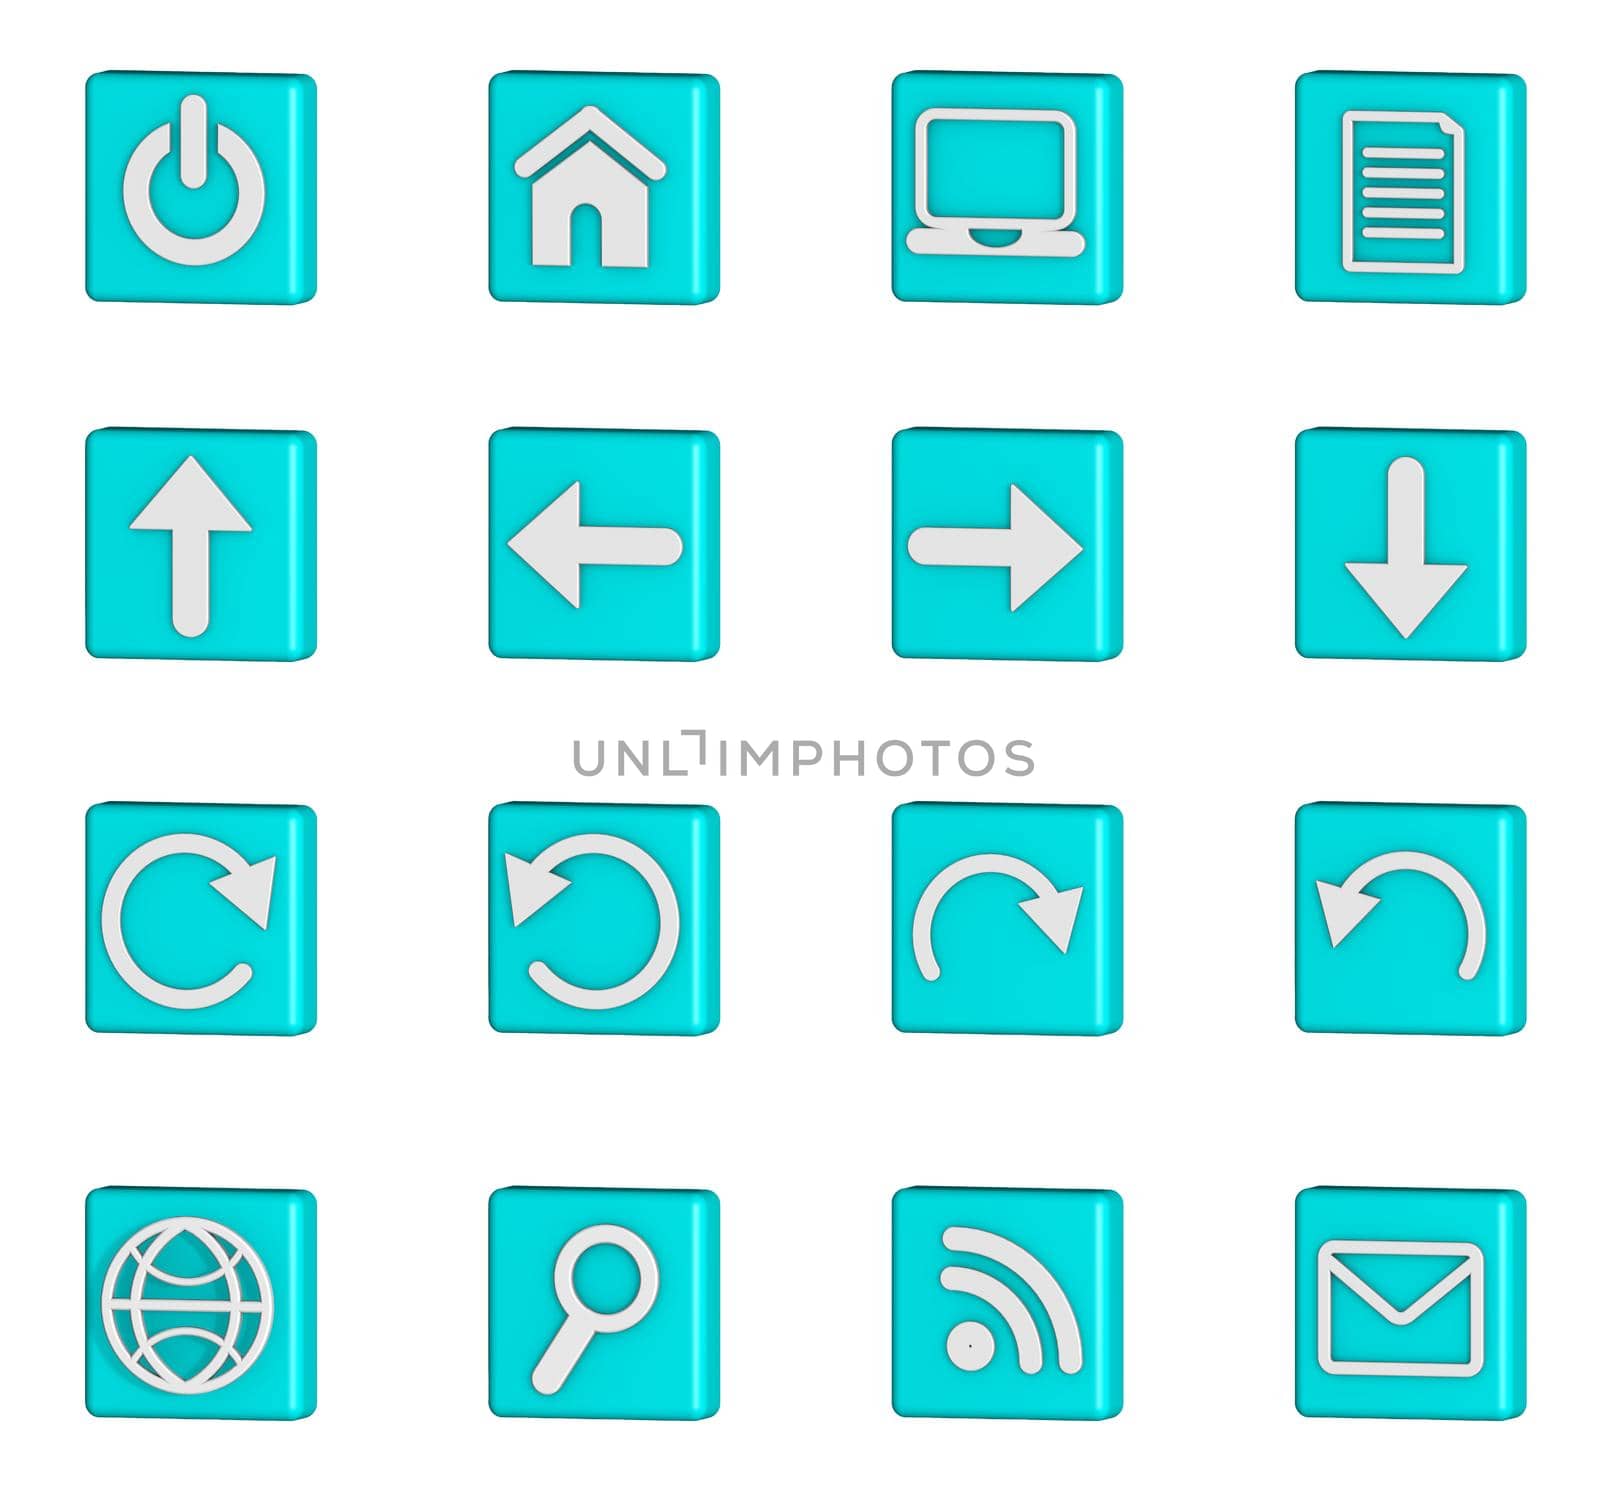 Web icons for business and office blue aqua by Milanchikov